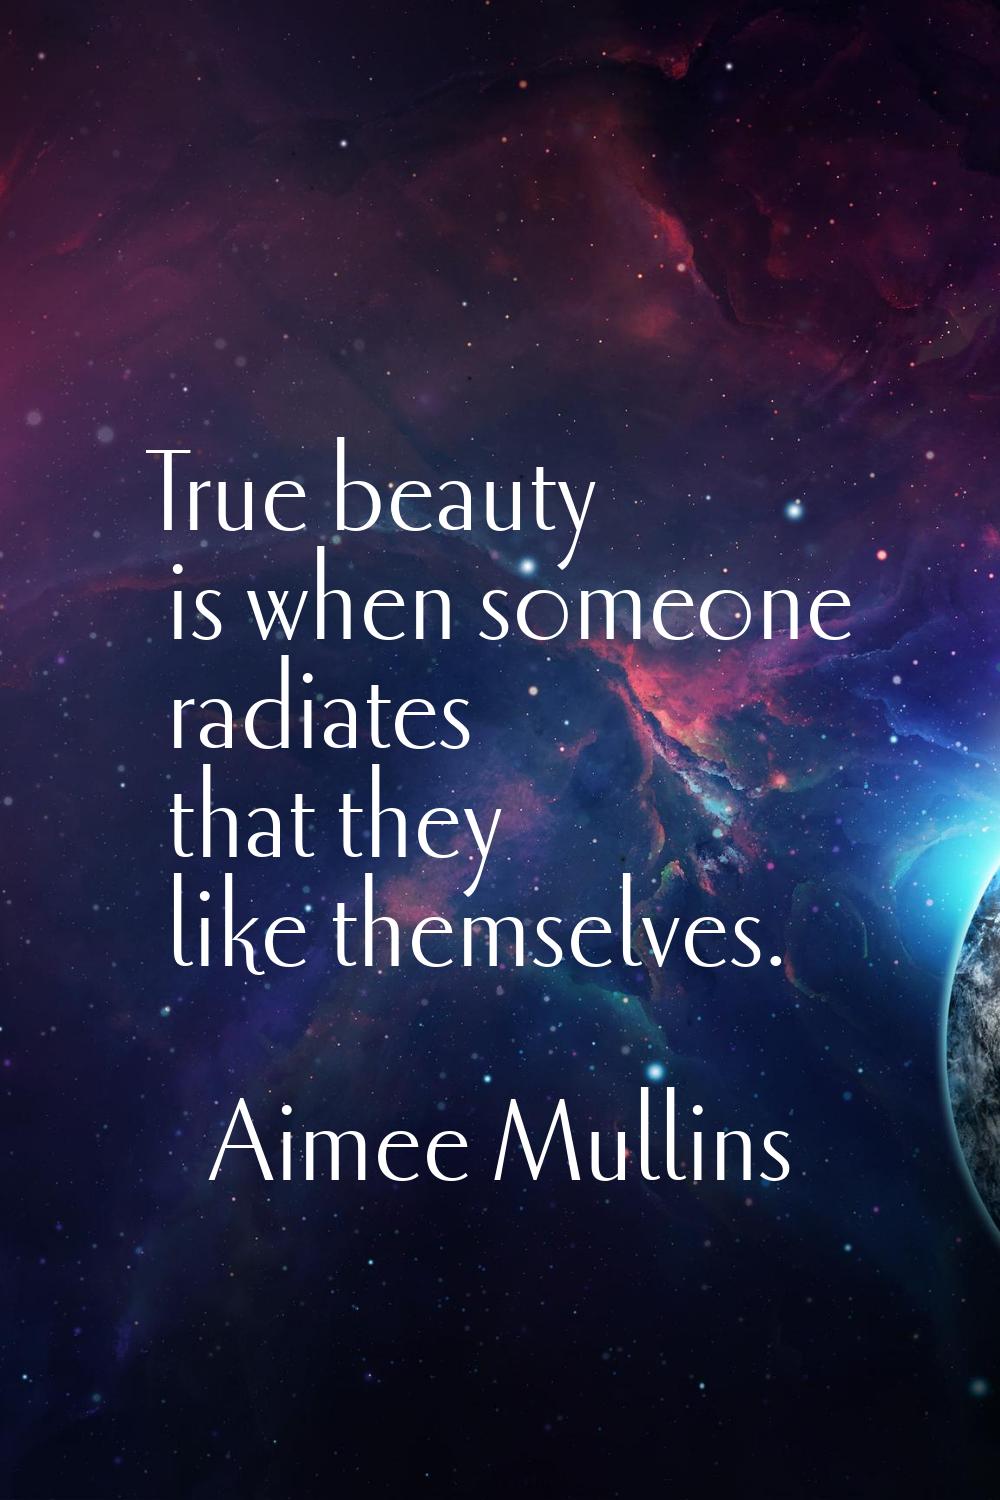 True beauty is when someone radiates that they like themselves.